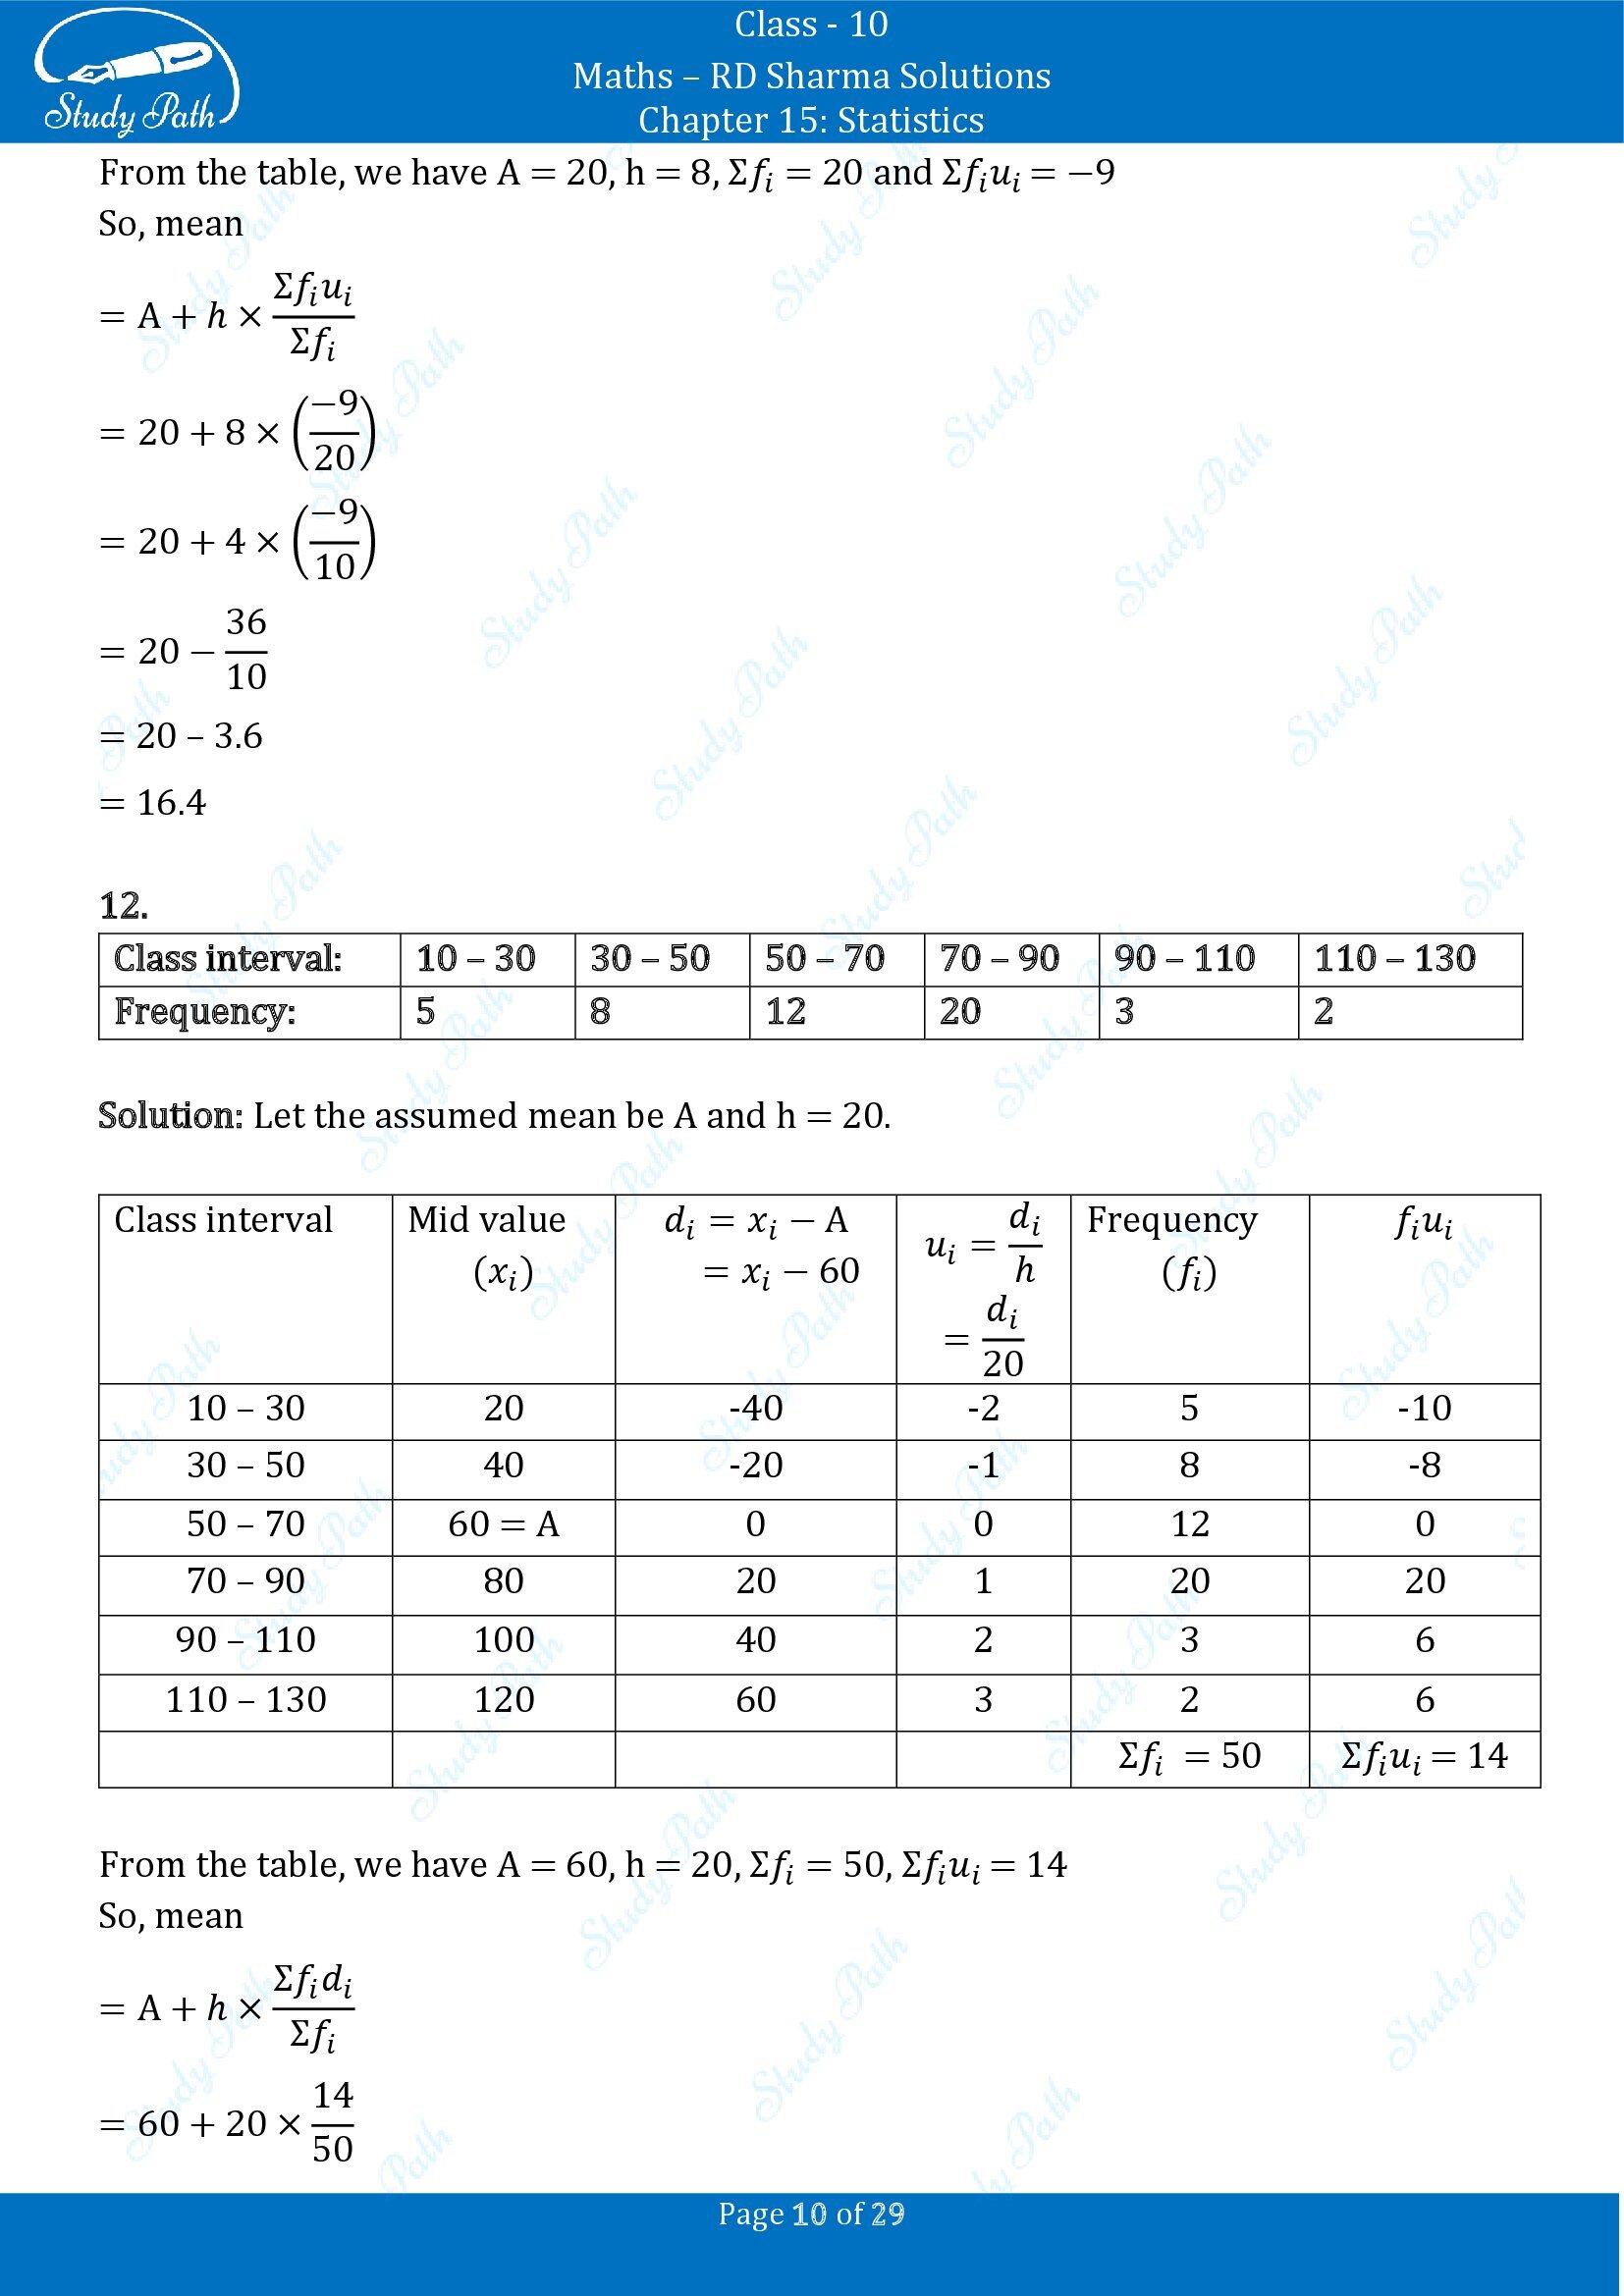 RD Sharma Solutions Class 10 Chapter 15 Statistics Exercise 15.3 0010